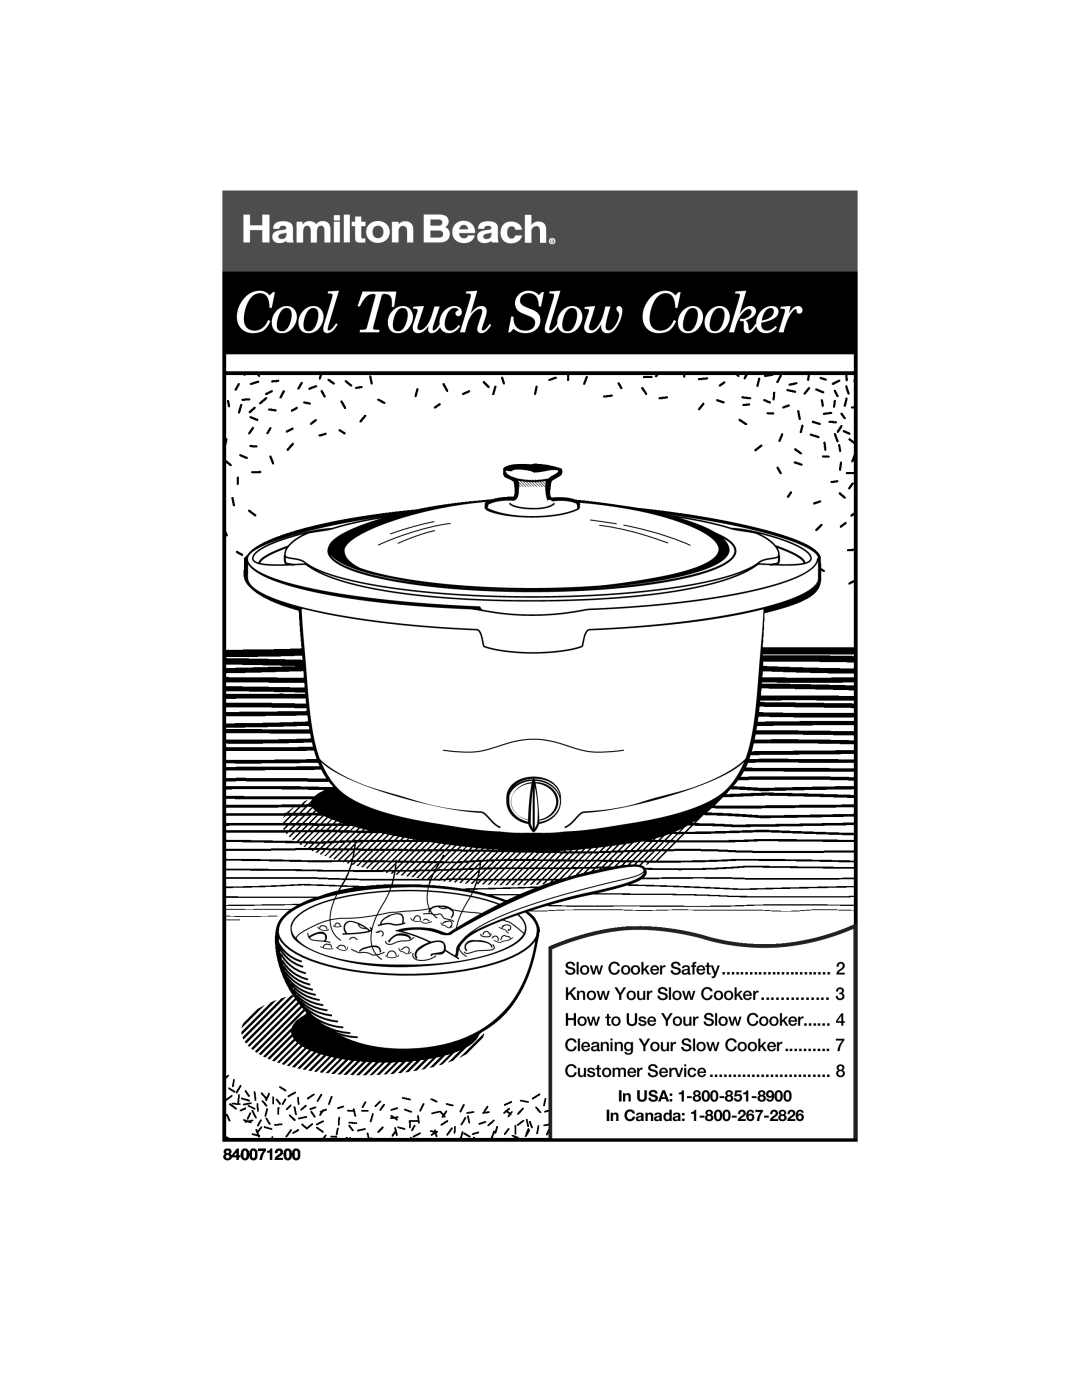 Hamilton Beach 840071200 manual Cool Touch Slow Cooker, Slow Cooker Safety, Customer Service, In USA, In Canada 